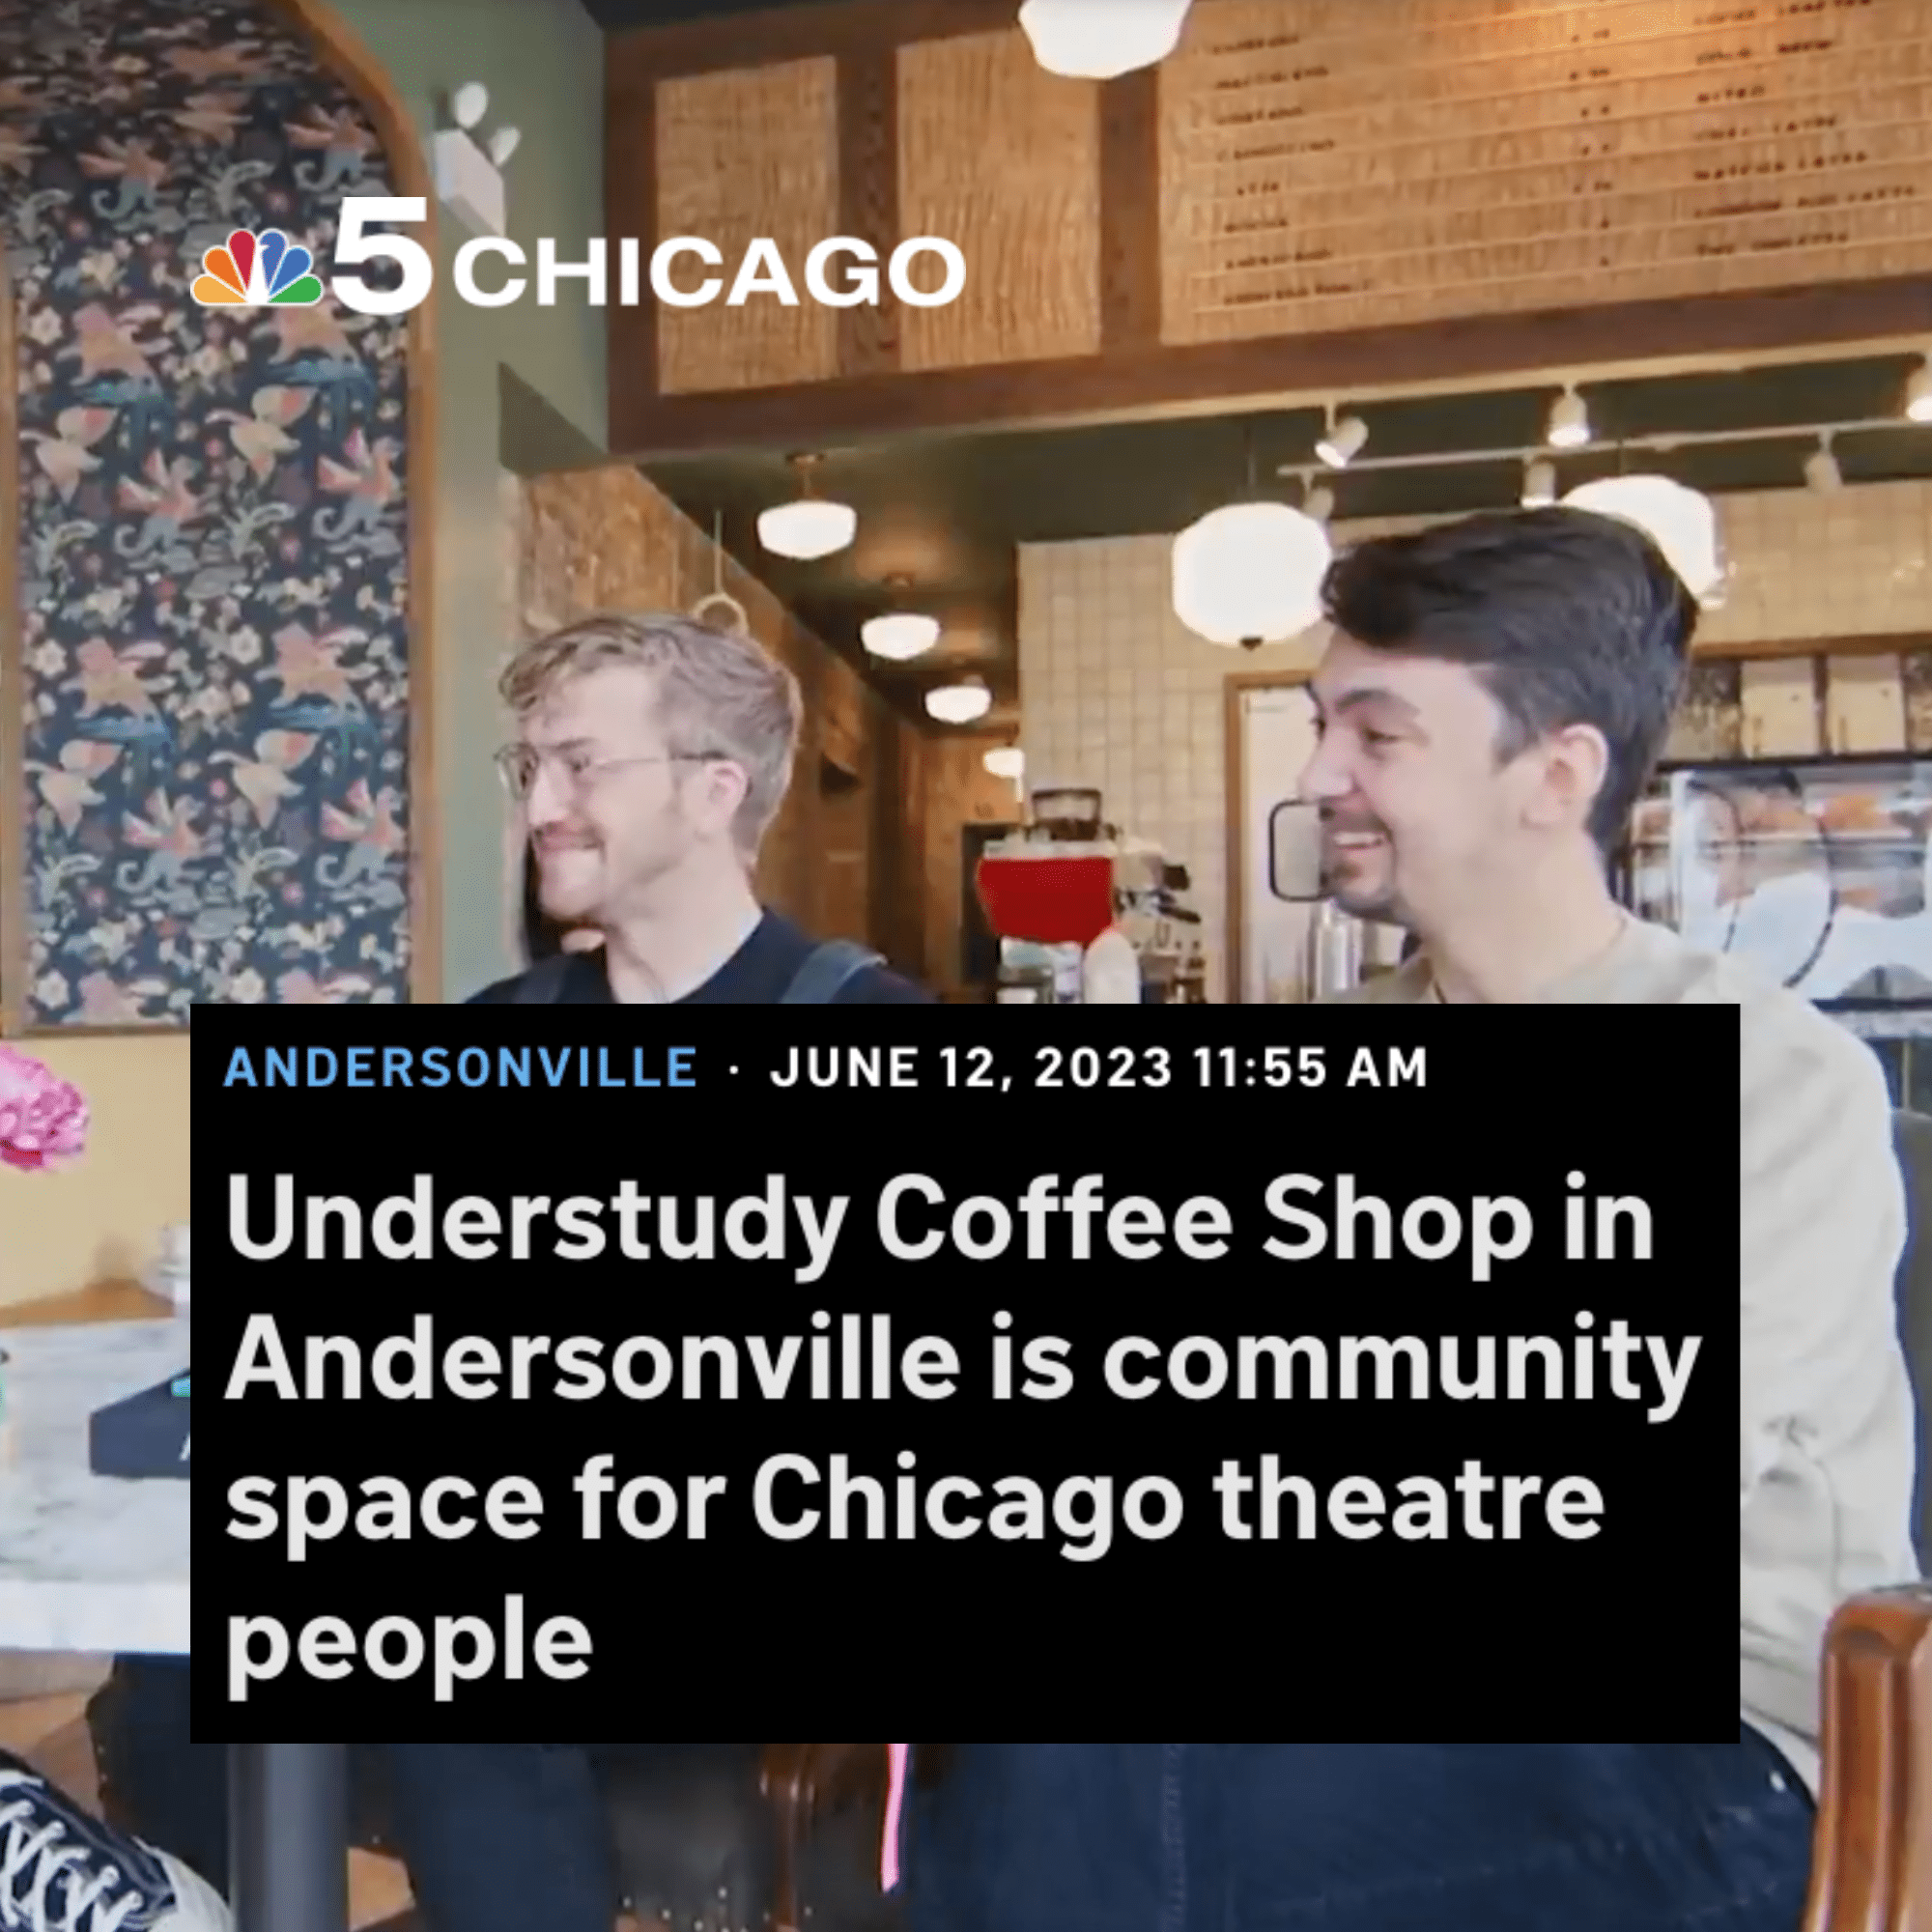 Understudy Coffee Shop in Andersonville is community space for Chicago theatre people